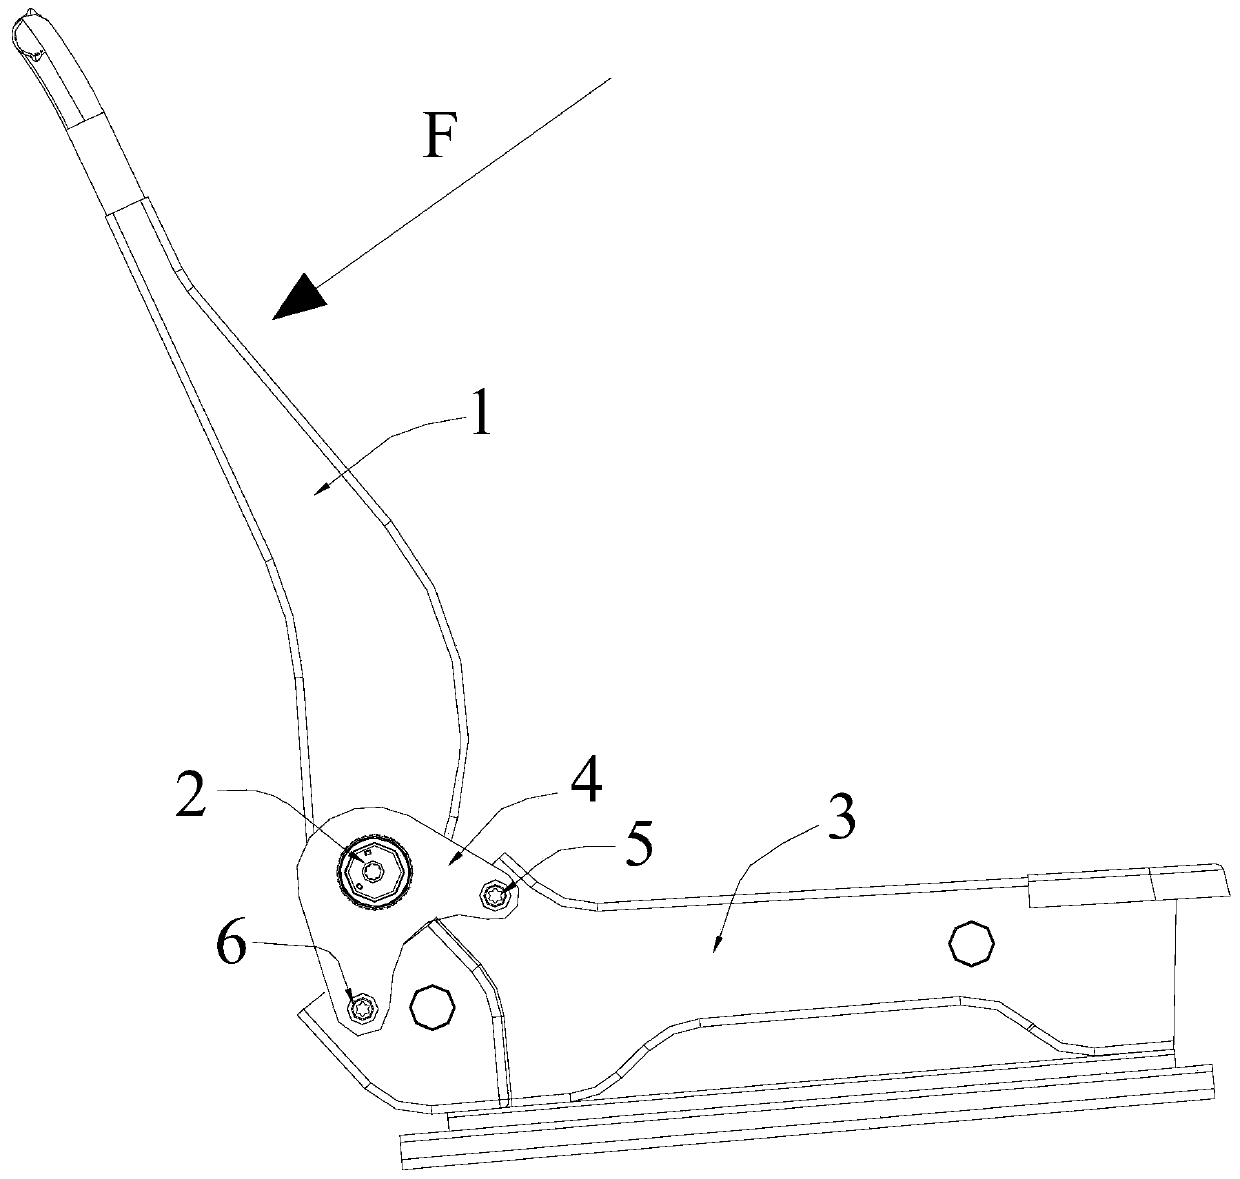 Stretching type rear-end collision seat energy absorption structure